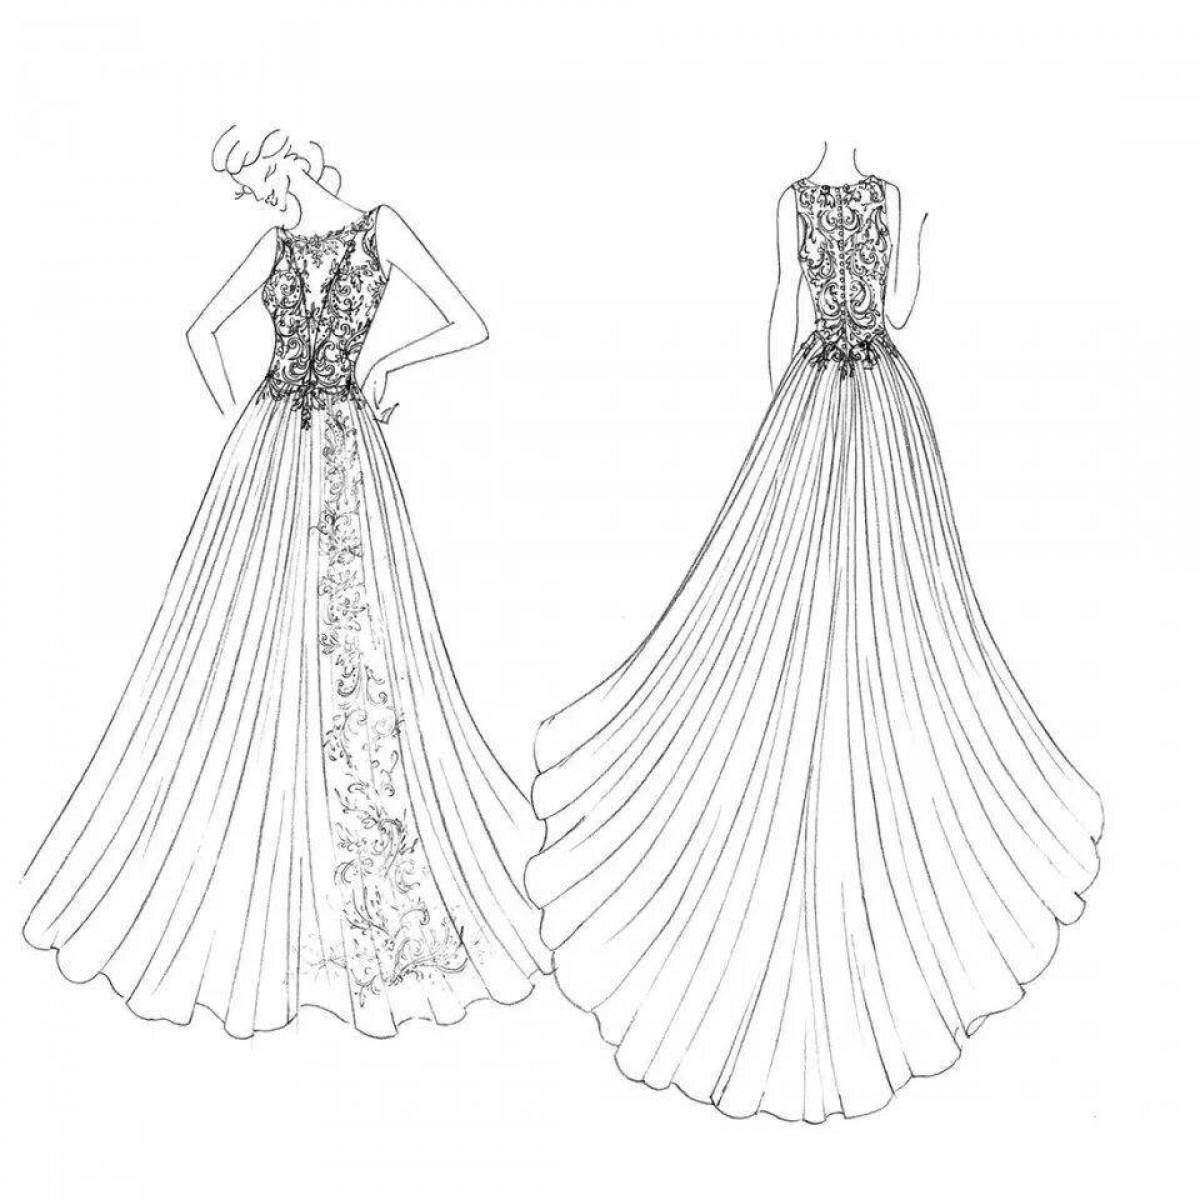 Coloring page with funny fashion design